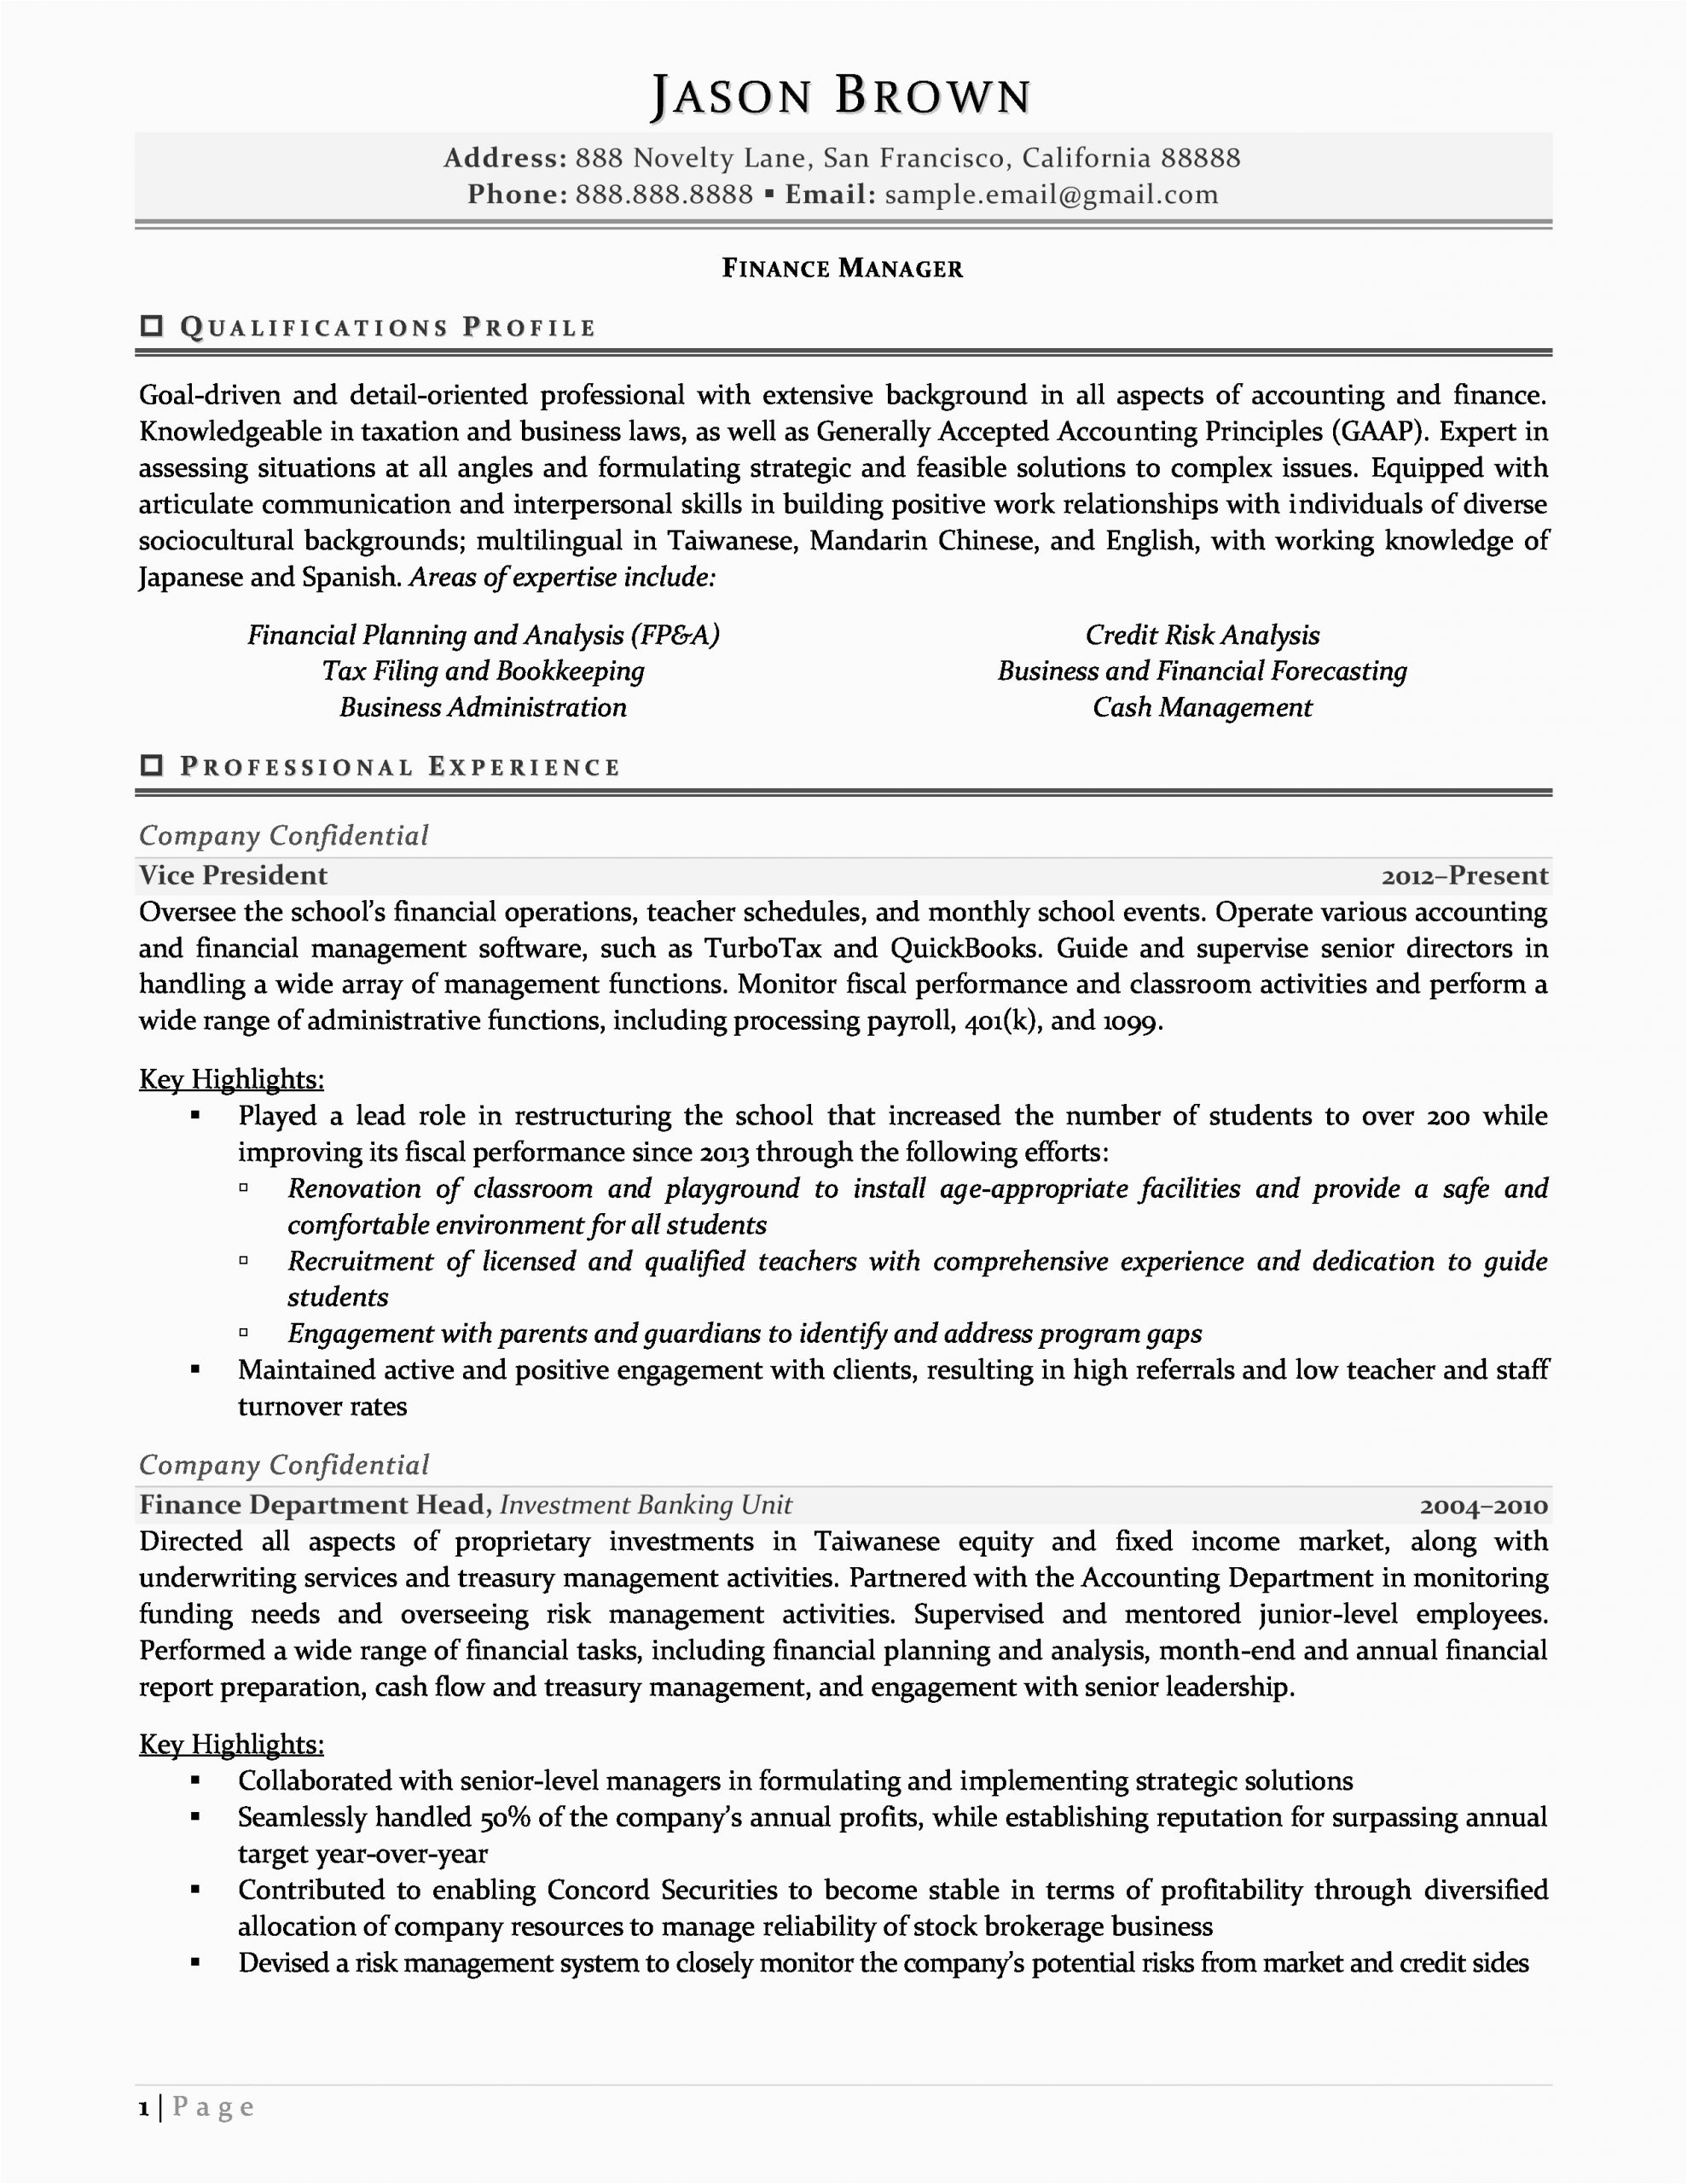 finance manager resume examples